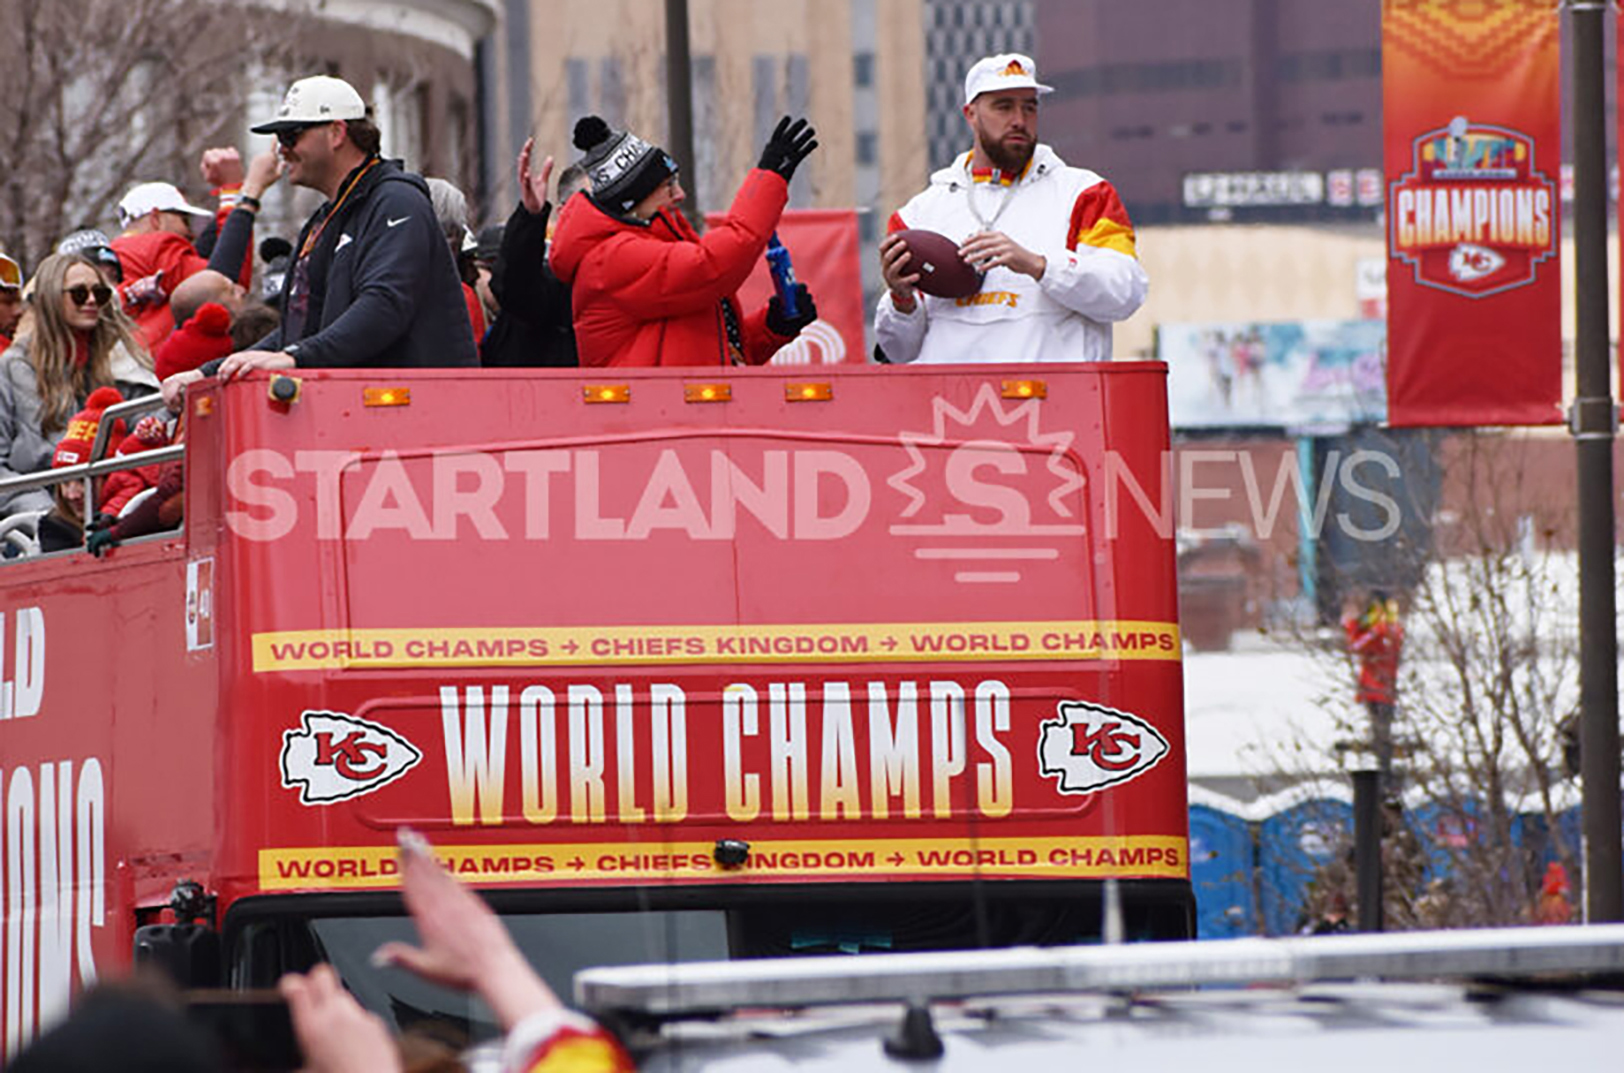 Will the street car still run? Is Taylor Swift coming? Your guide to the Chiefs’ Super Bowl victory parade in Kansas City